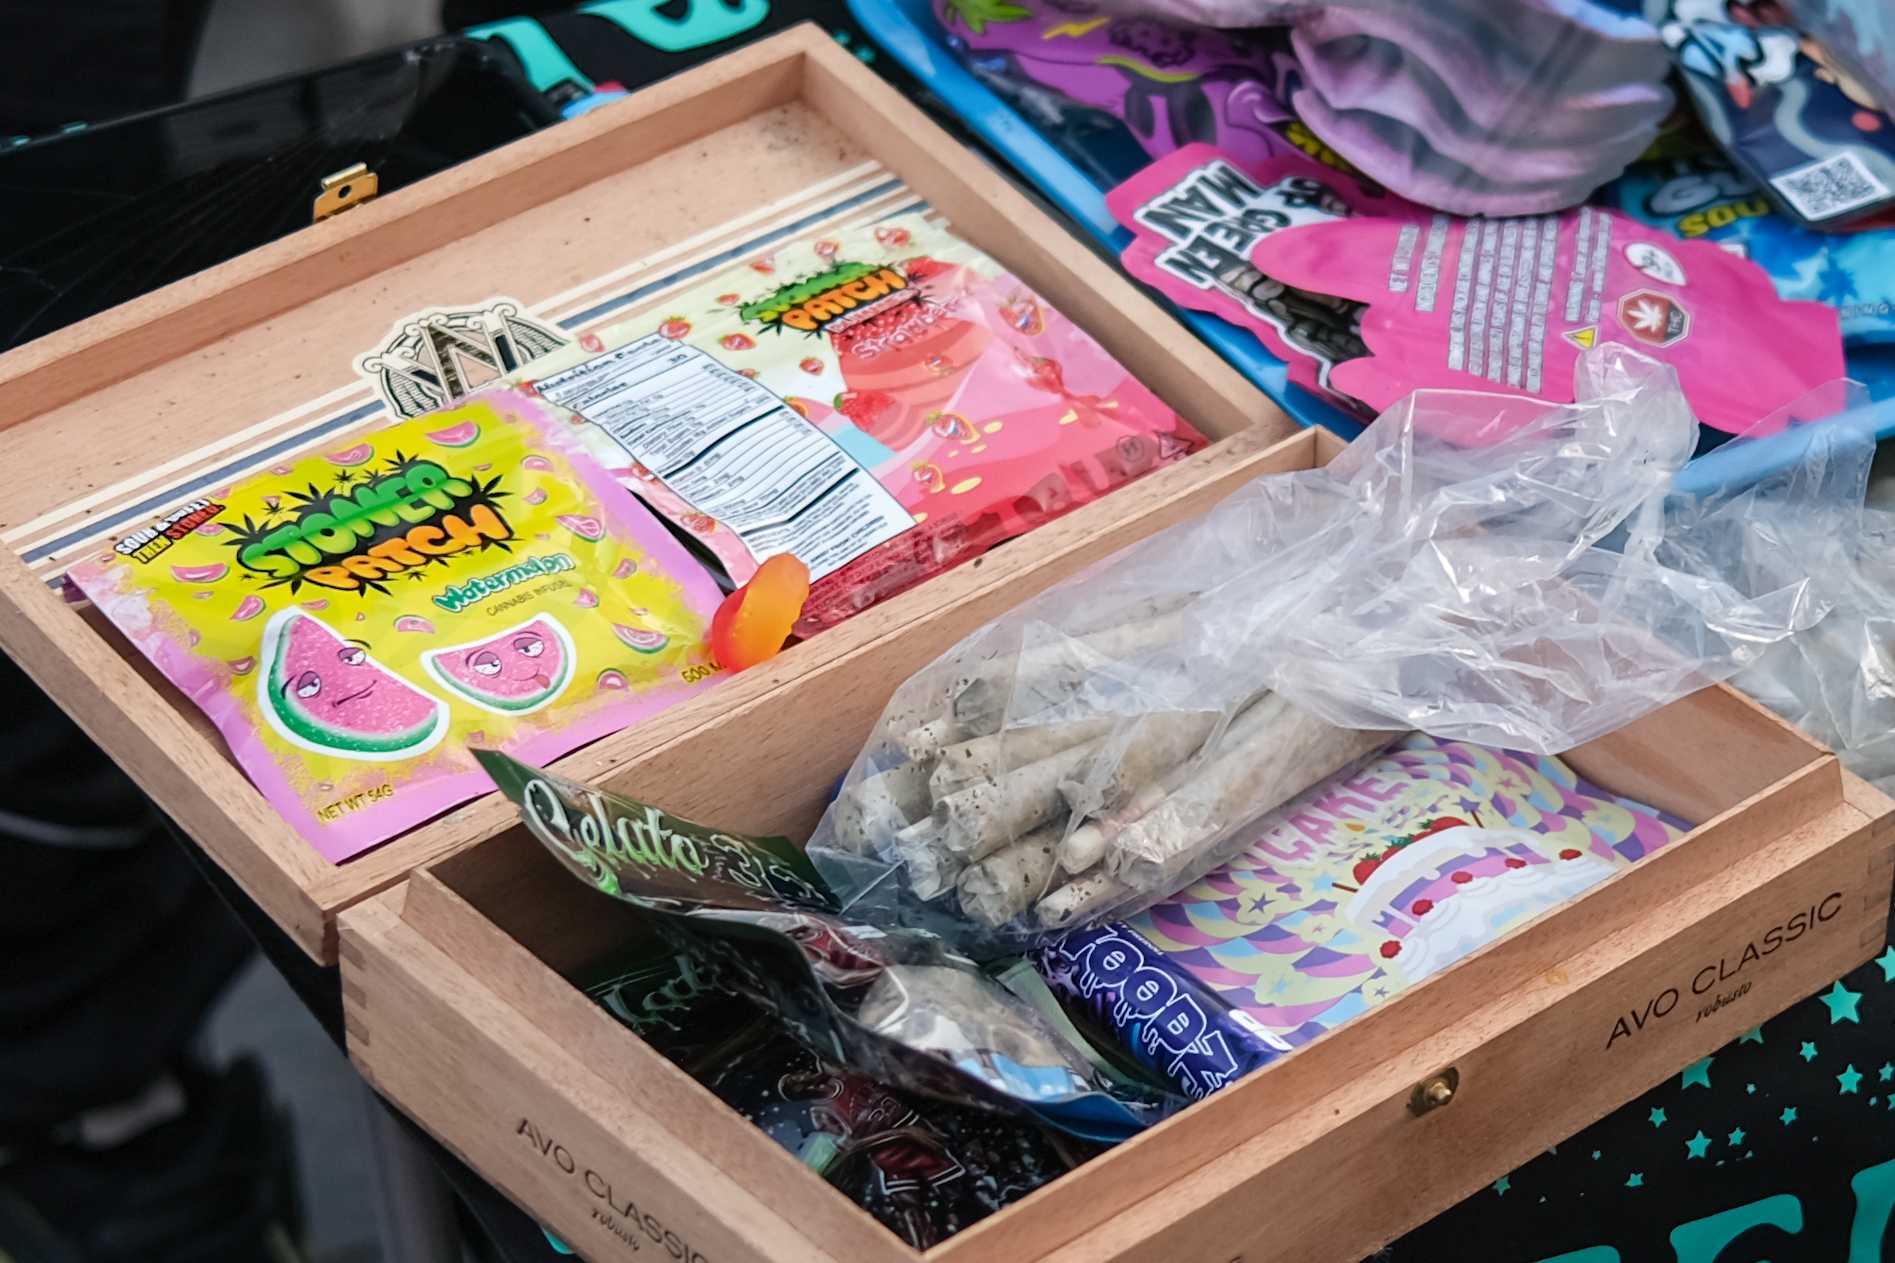 NEW YORK, NEW YORK - APRIL 20: Pre rolled joints and gummy infused candy are sold on 4/20 on World Weed Day in Washington Square Park on April 20, 2022 in New York City. Hundreds of people flocked to Washington Square Park where vendors set up tables selling cannabis flowers, as well as other cannabis-infused products. Laws across the U.S. vary by state, but in New York City, it is legal for adults 21 and older to possess up to three ounces of cannabis and up to 24 grams of concentrated cannabis for personal use. (Photo by Alexi Rosenfeld/Getty Images)